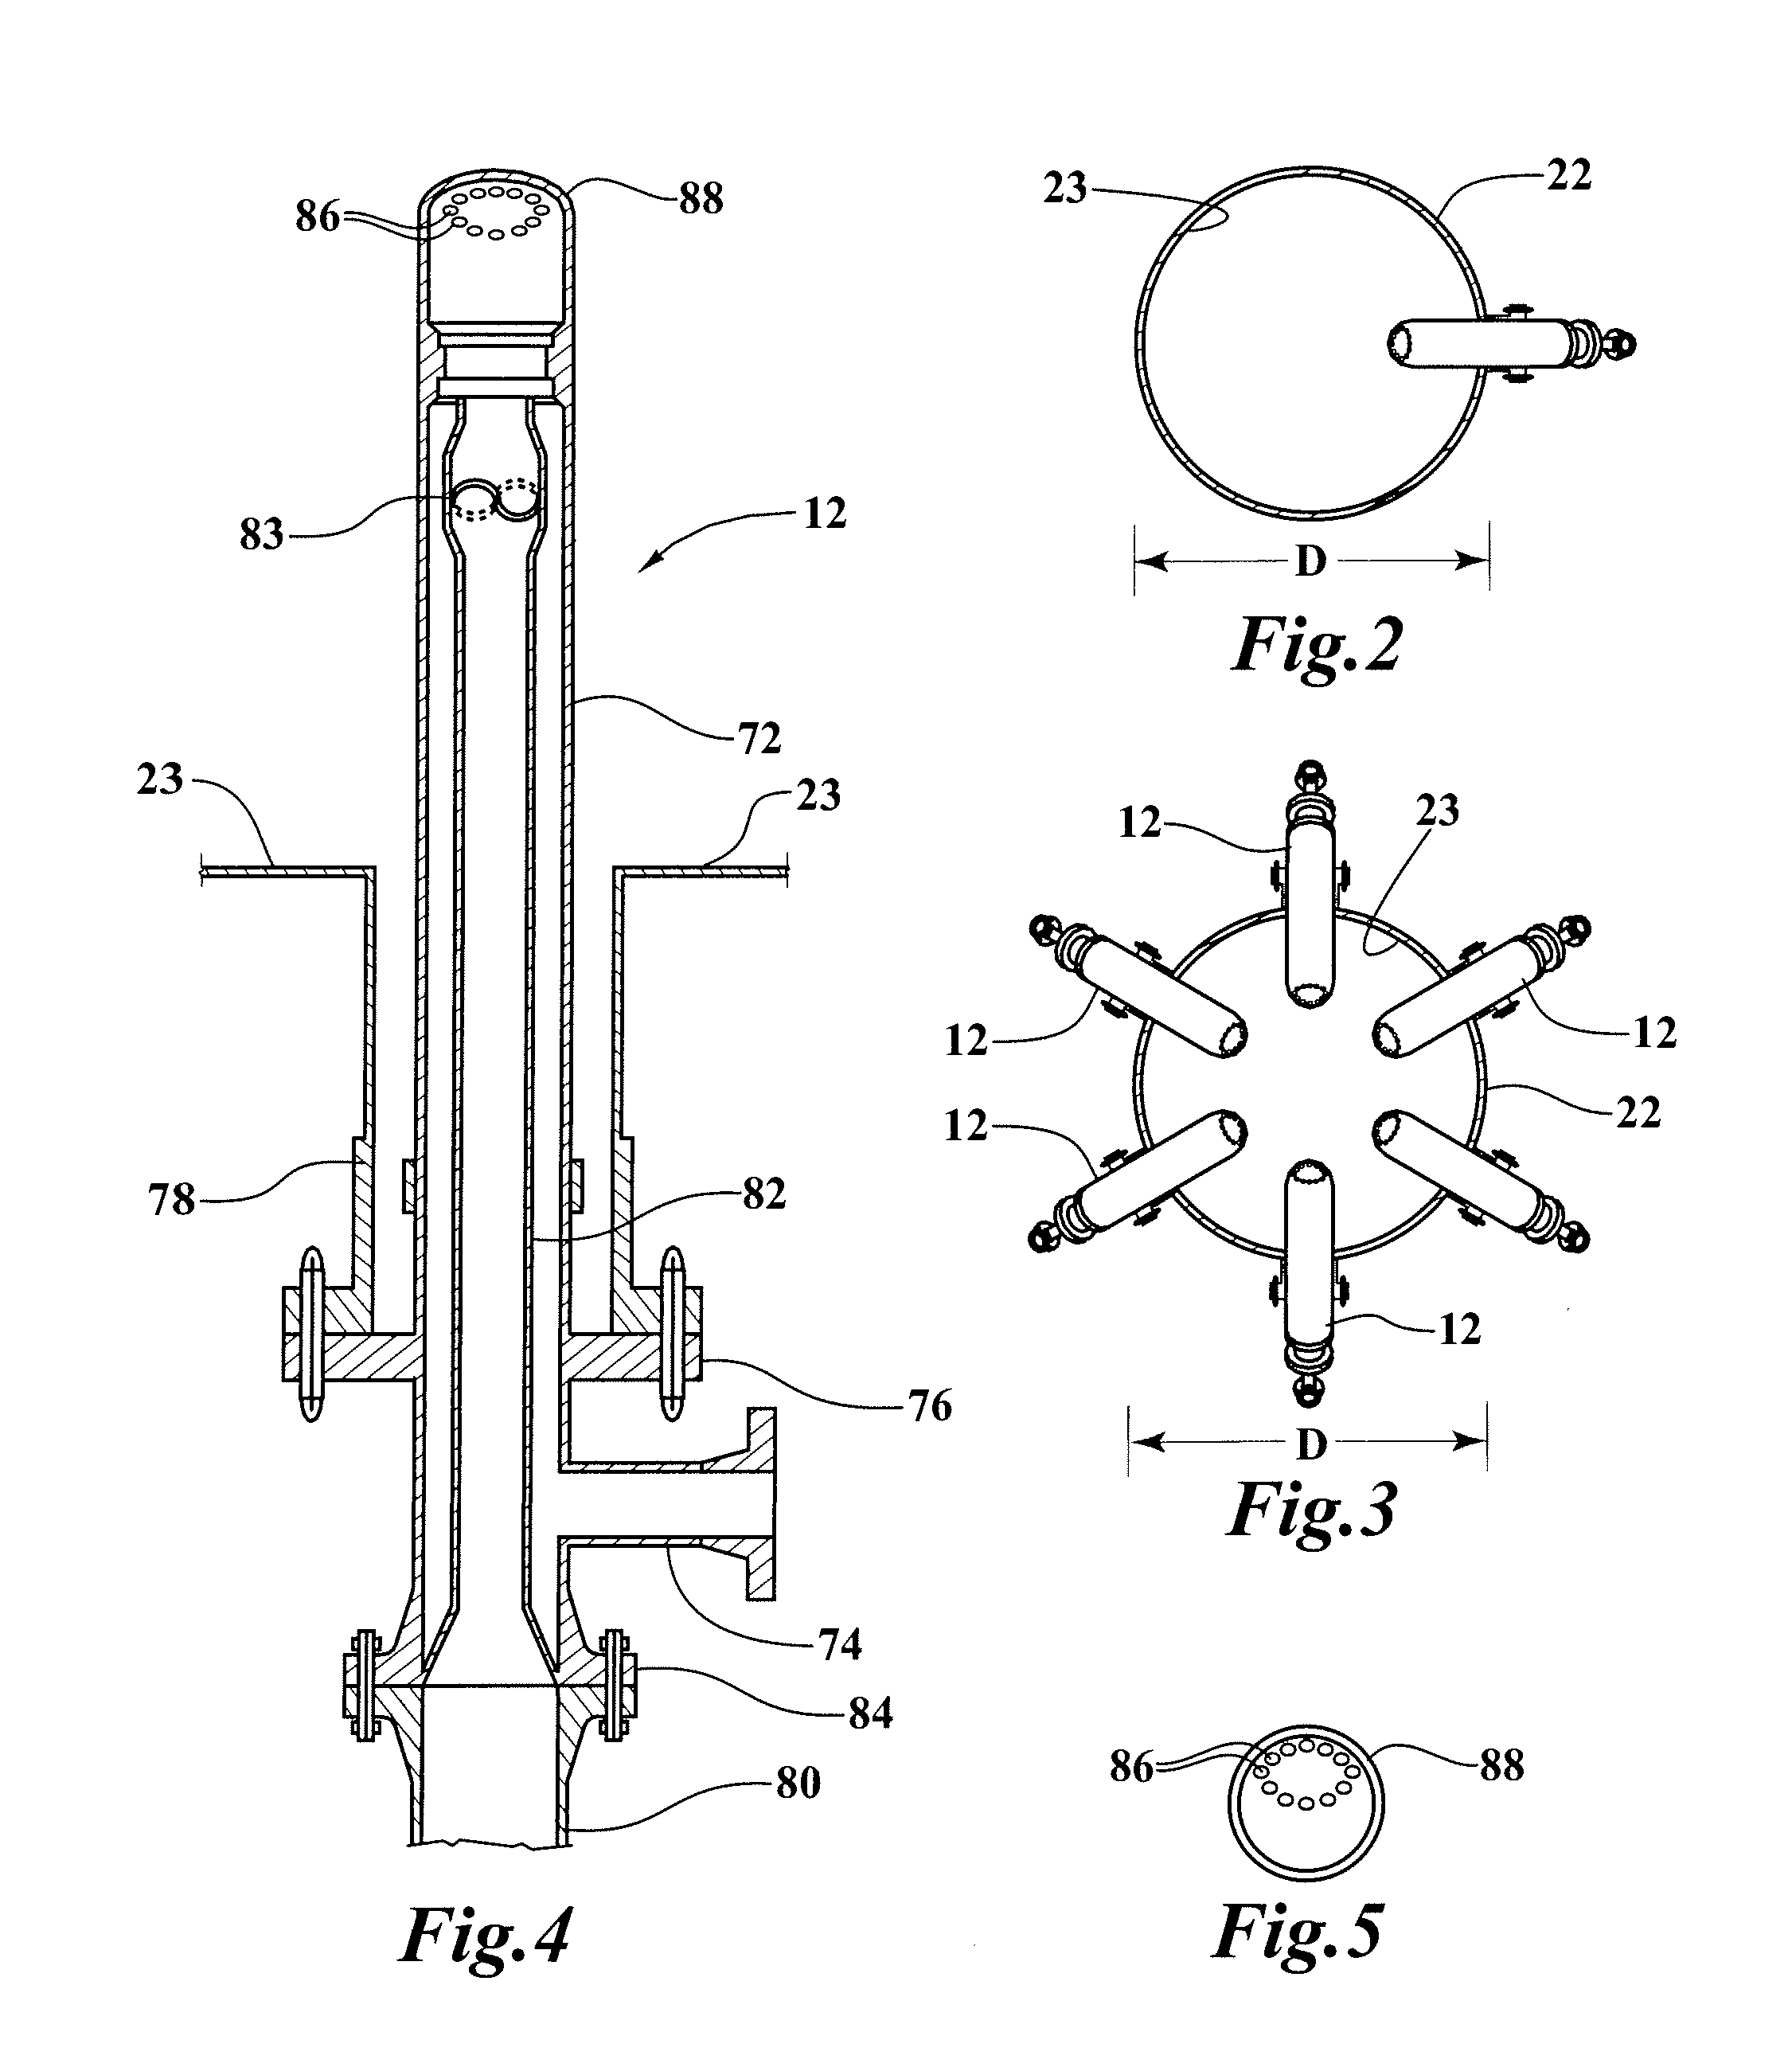 Device for Contacting High Contaminated Feedstocks with Catalyst in an FCC Unit